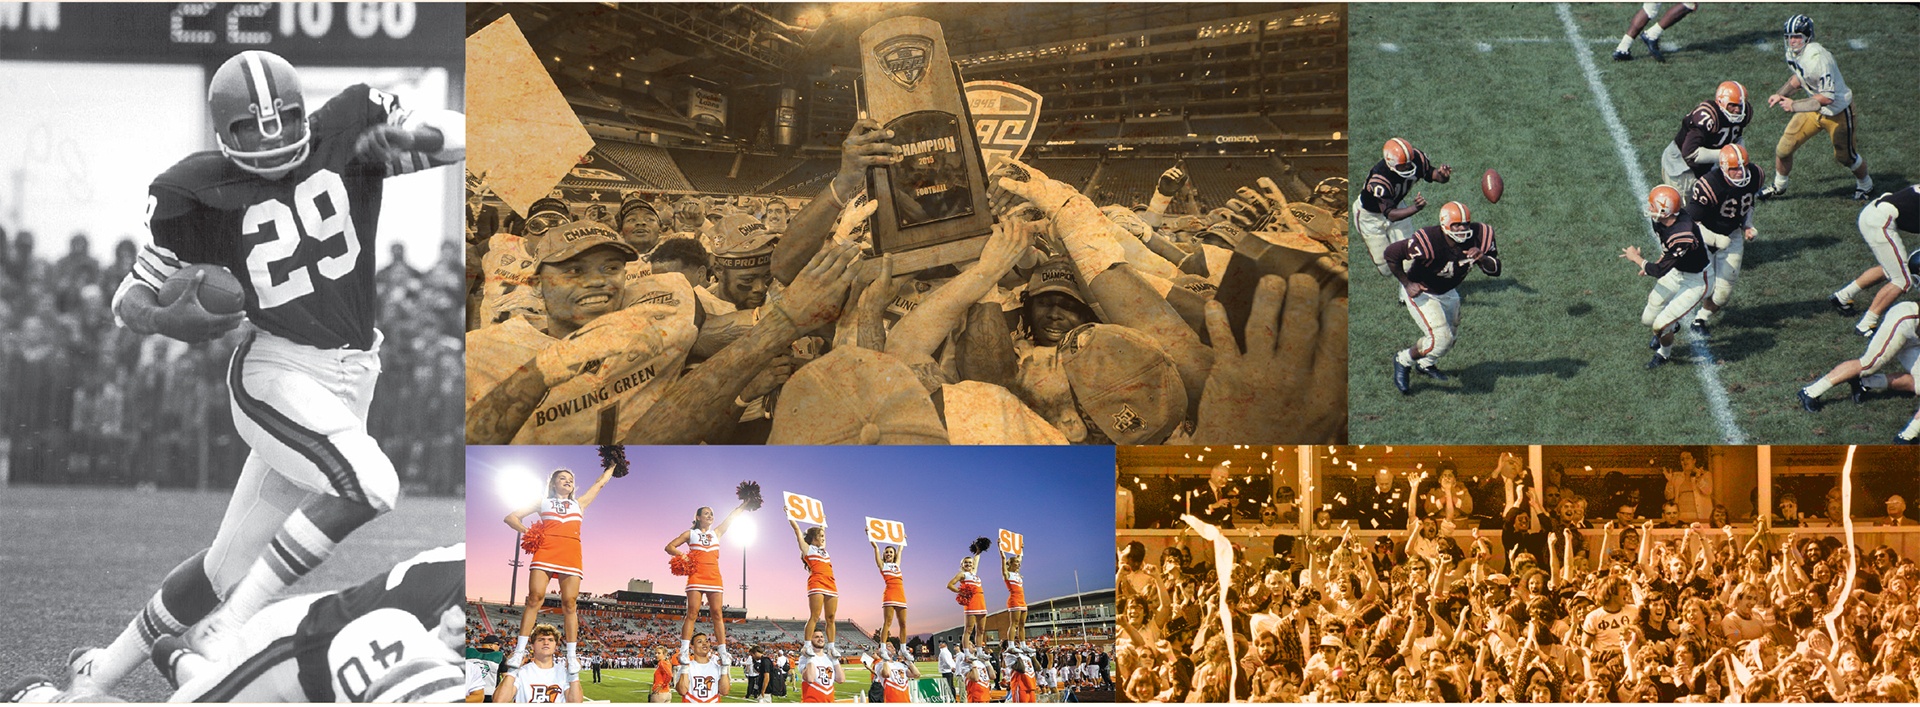 Collage of football photos including cheerleaders holding trophy and action photos